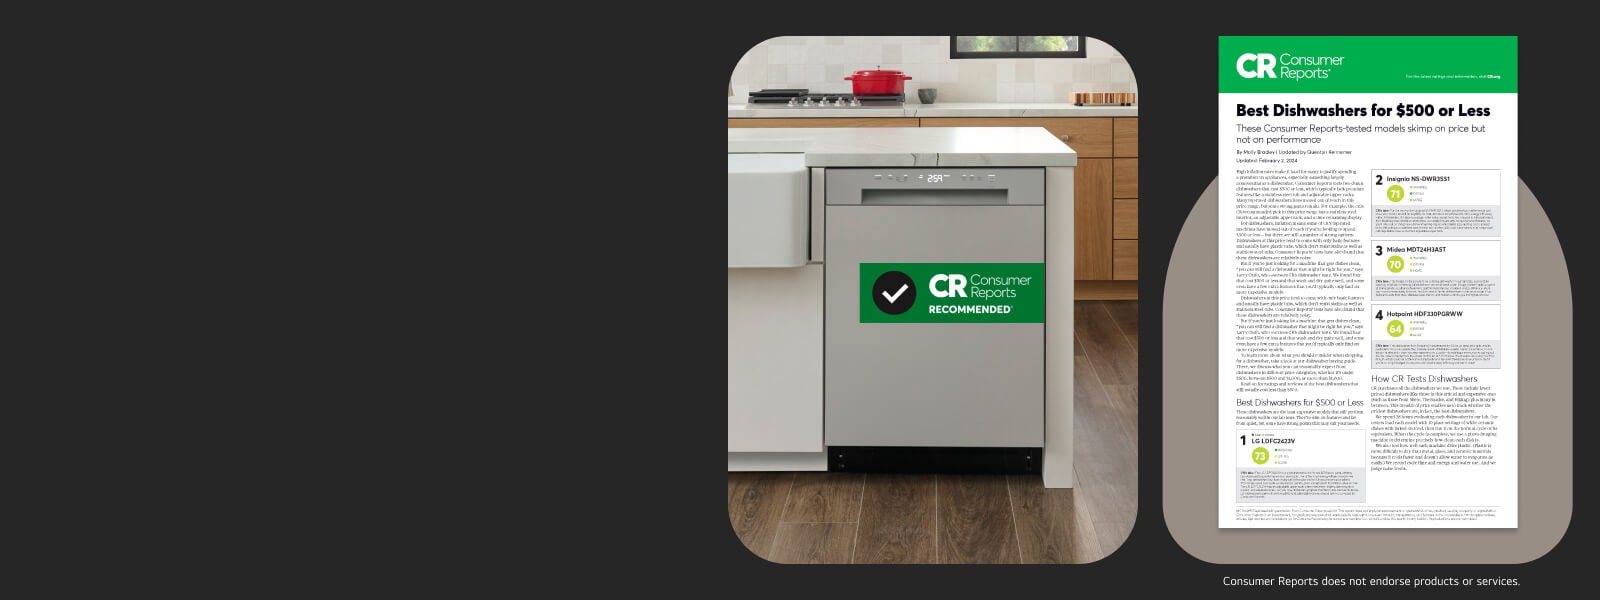 Front control dishwasher with Consumer Reports Best Dishwashers for $500 or Less article. Consumer Reports does not endorse products or services.